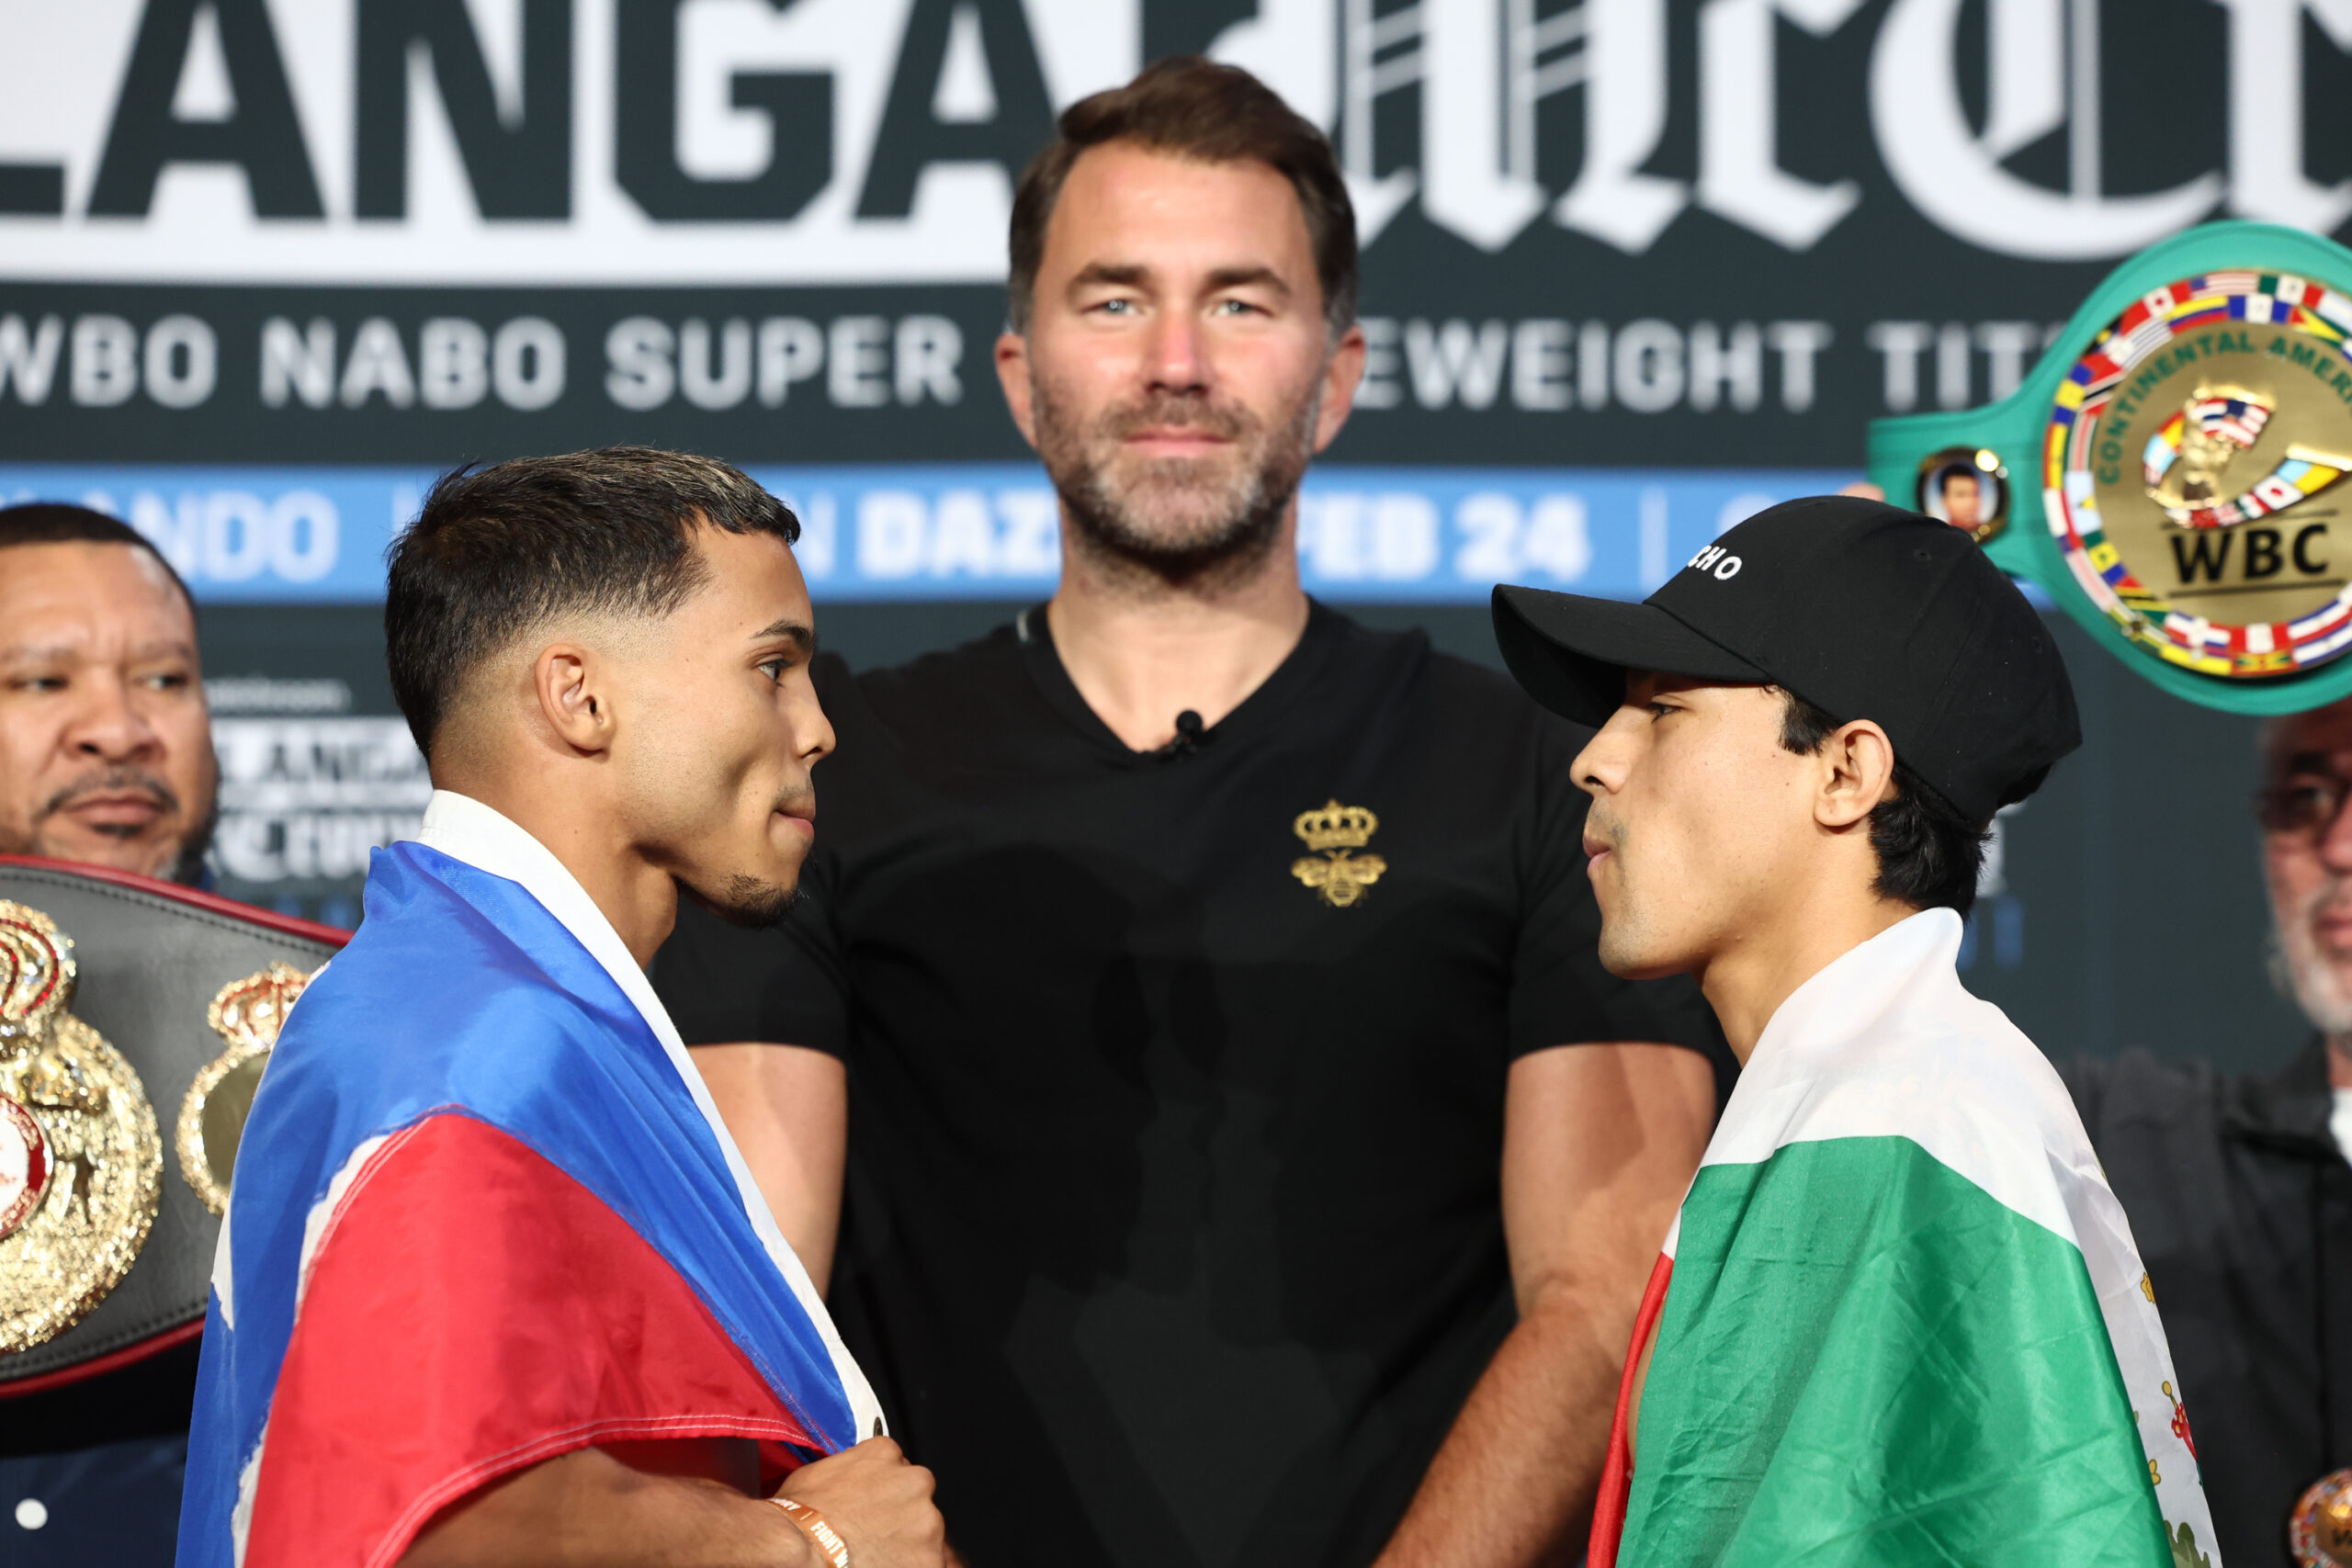 Yankiel Rivera and Andy Dominguez pose after weighing in for their February 24, 2024 fight at the Caribe Royale Resort in Orlando, FL. Mandatory Credit: Ed Mulholland/Matchroom.